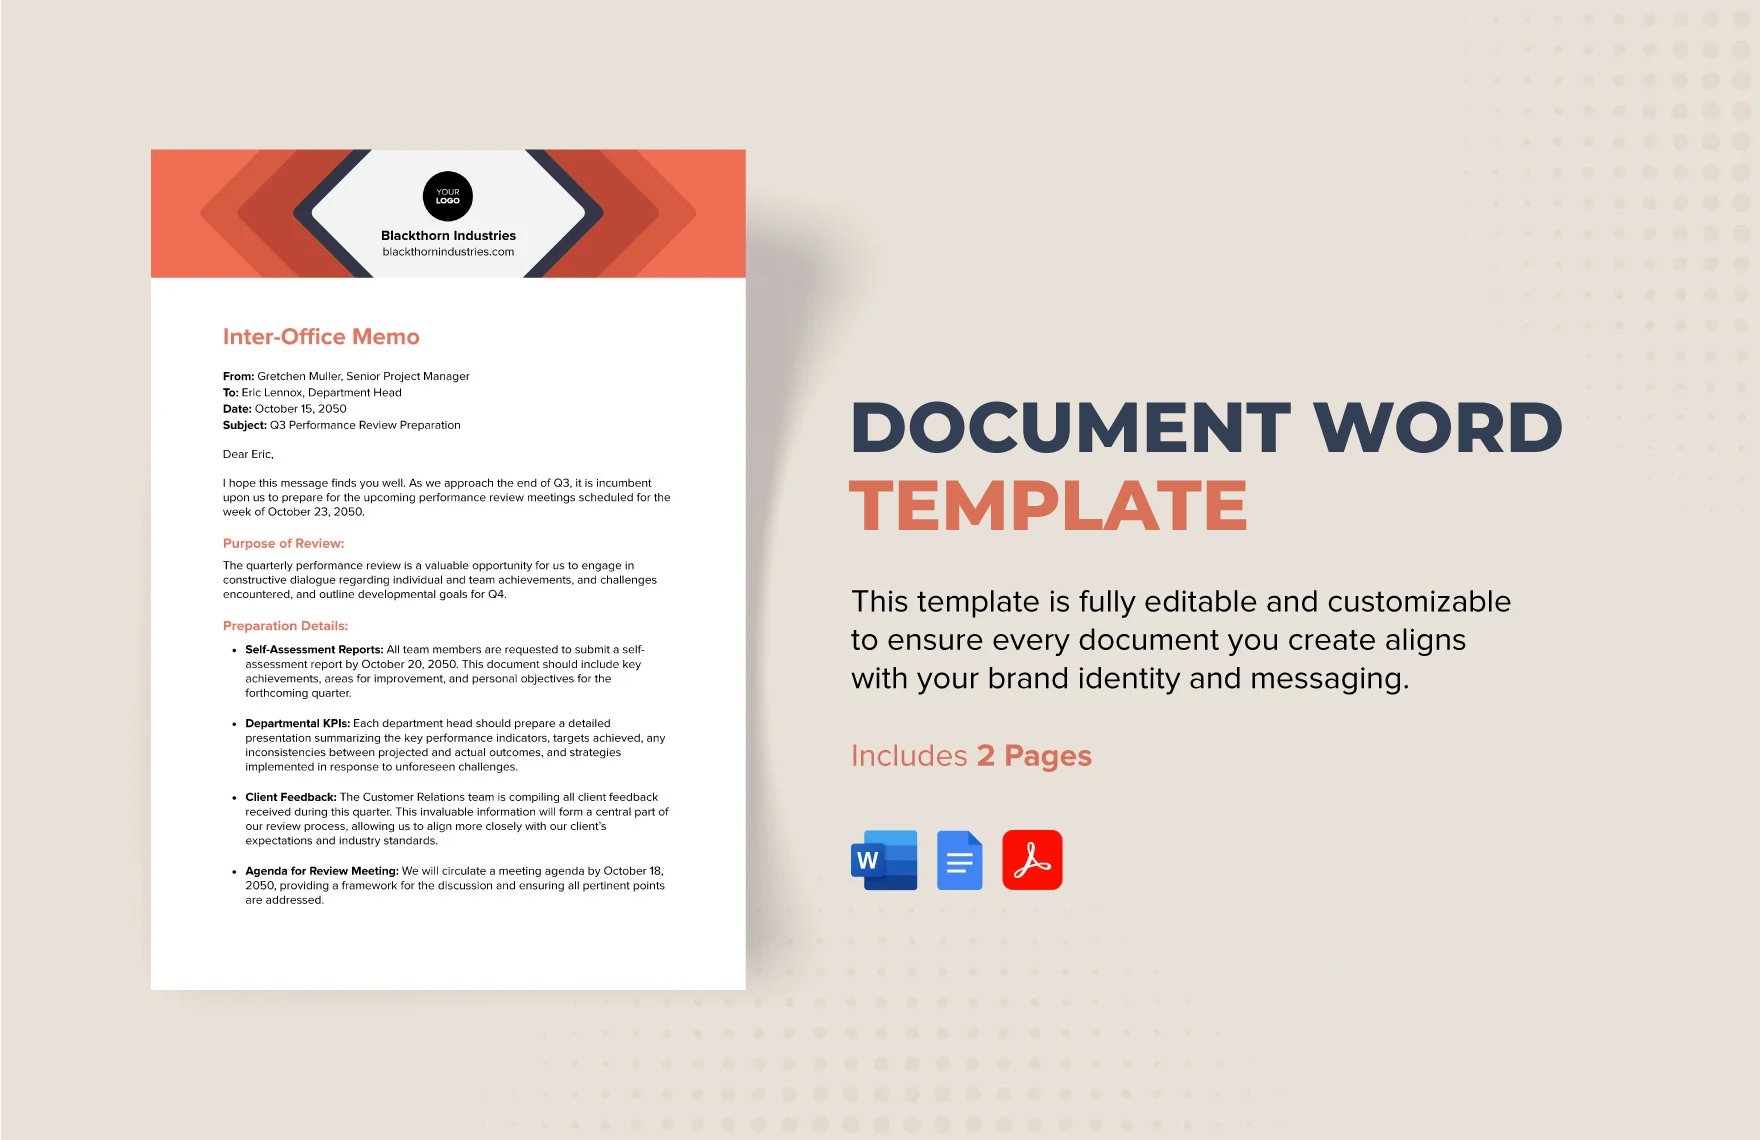 Document Word Template